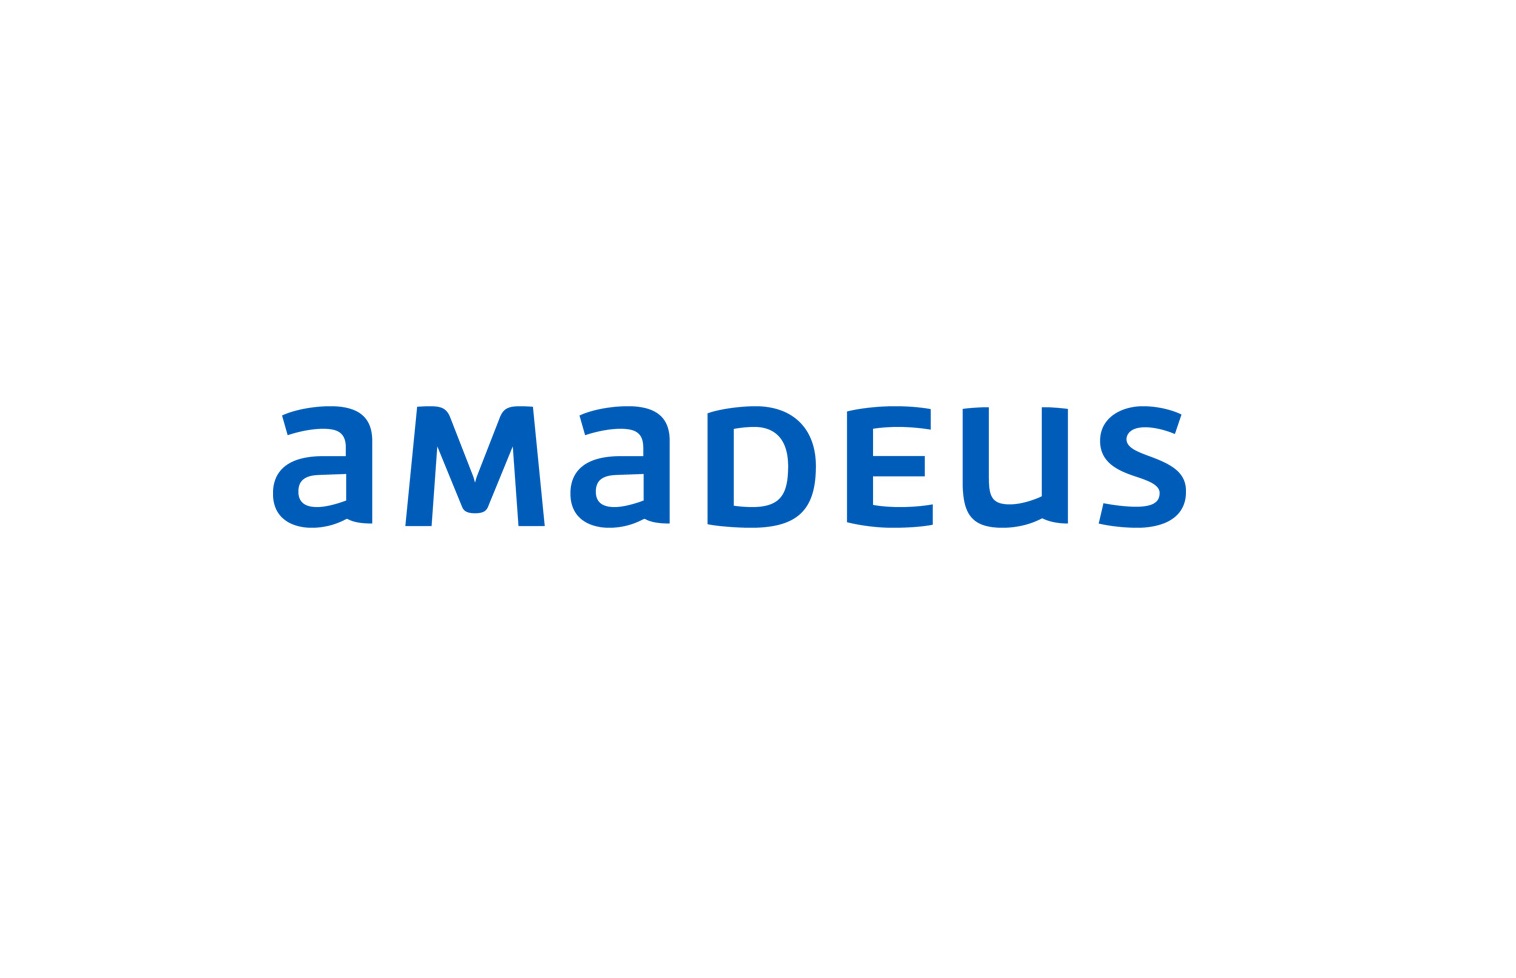 Australasia’s Quest Apartment inks deal with Amadeus for business travel insights